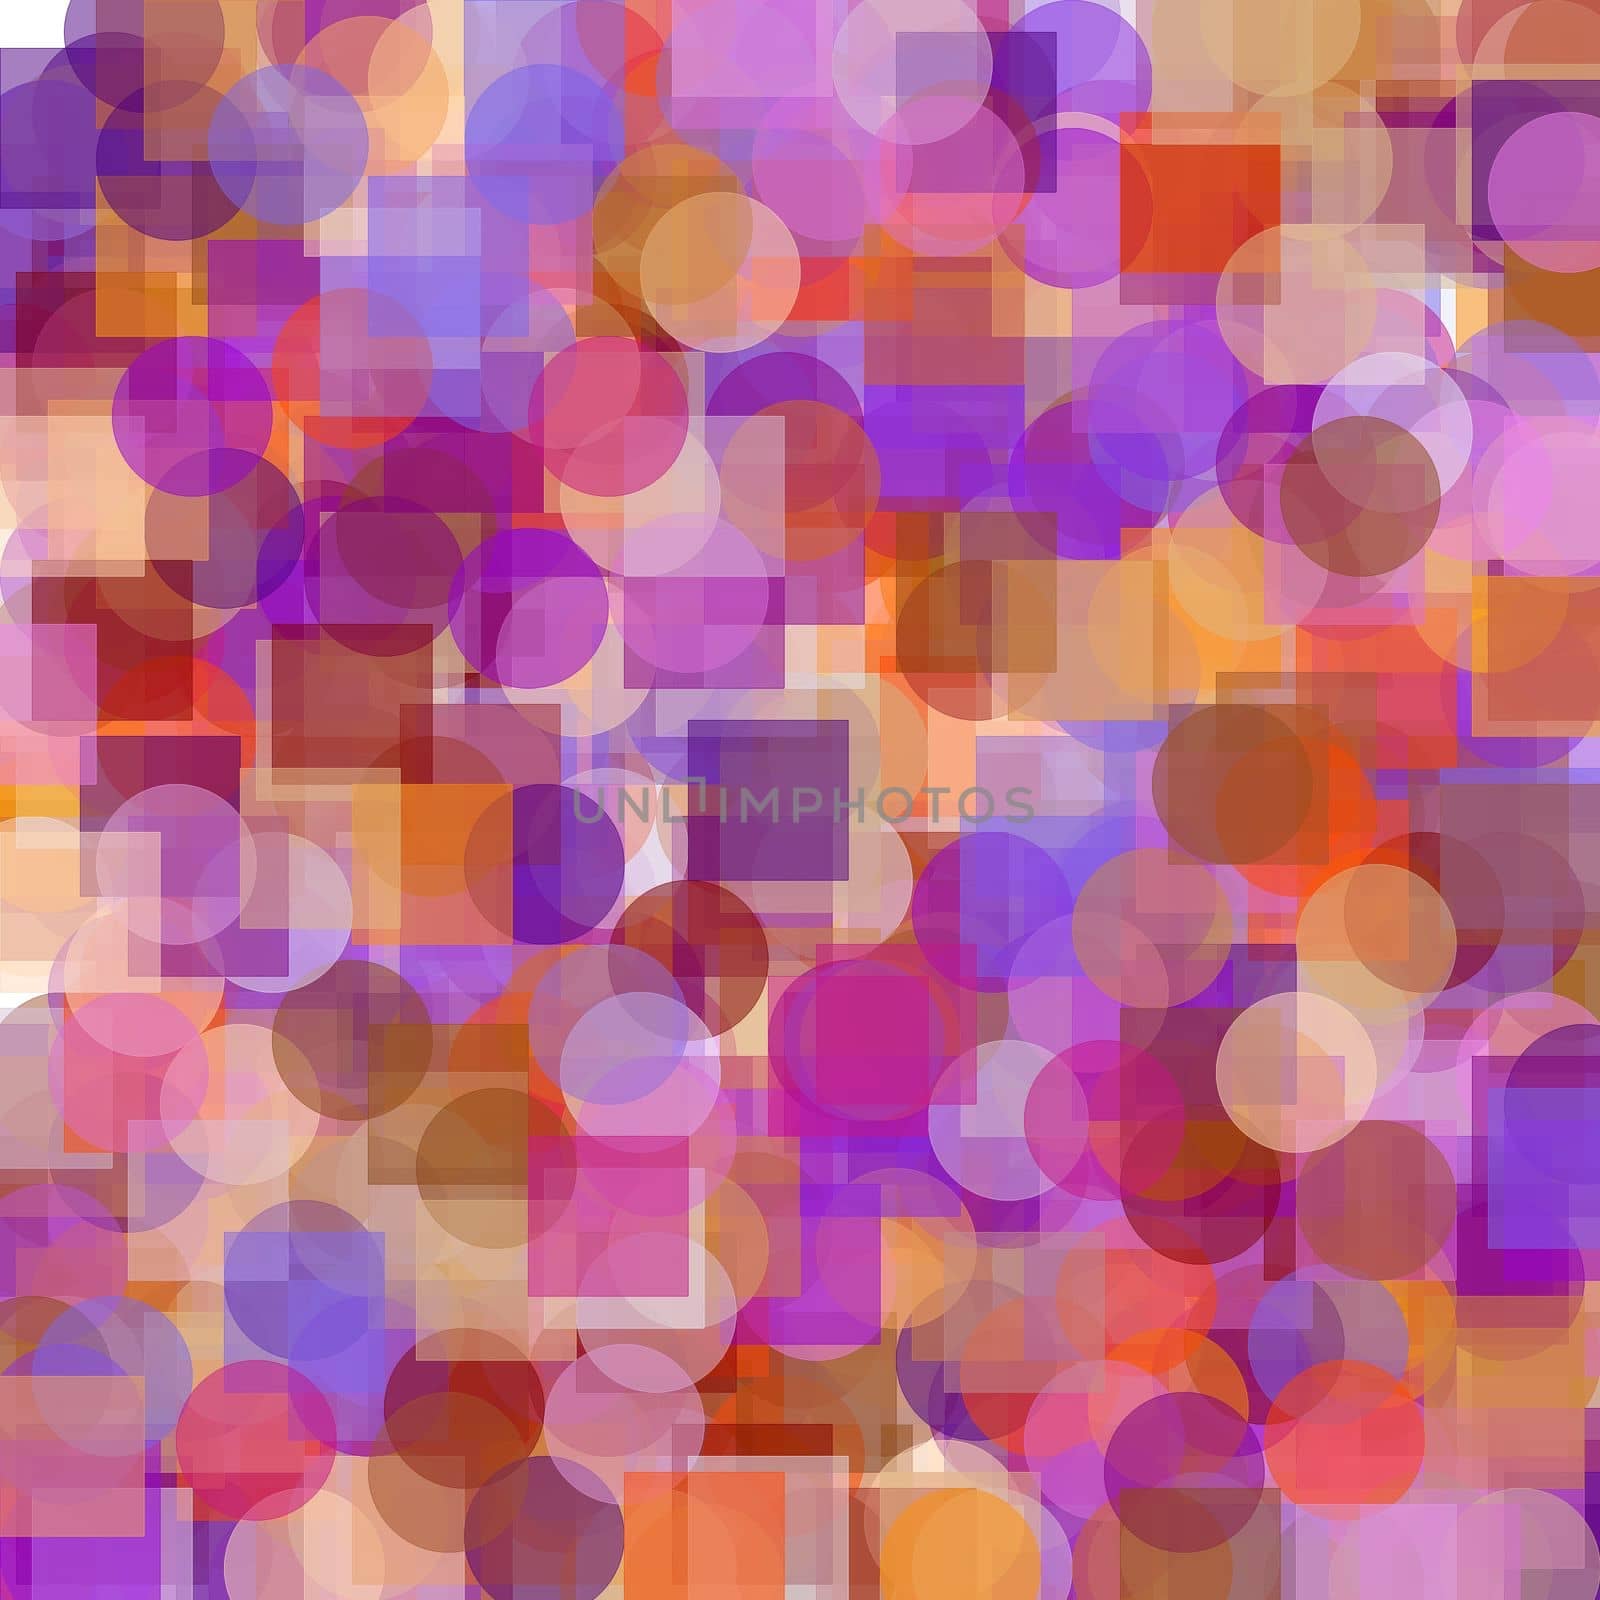 Abstract minimalist brown orange violet illustration with circles squares useful as a background